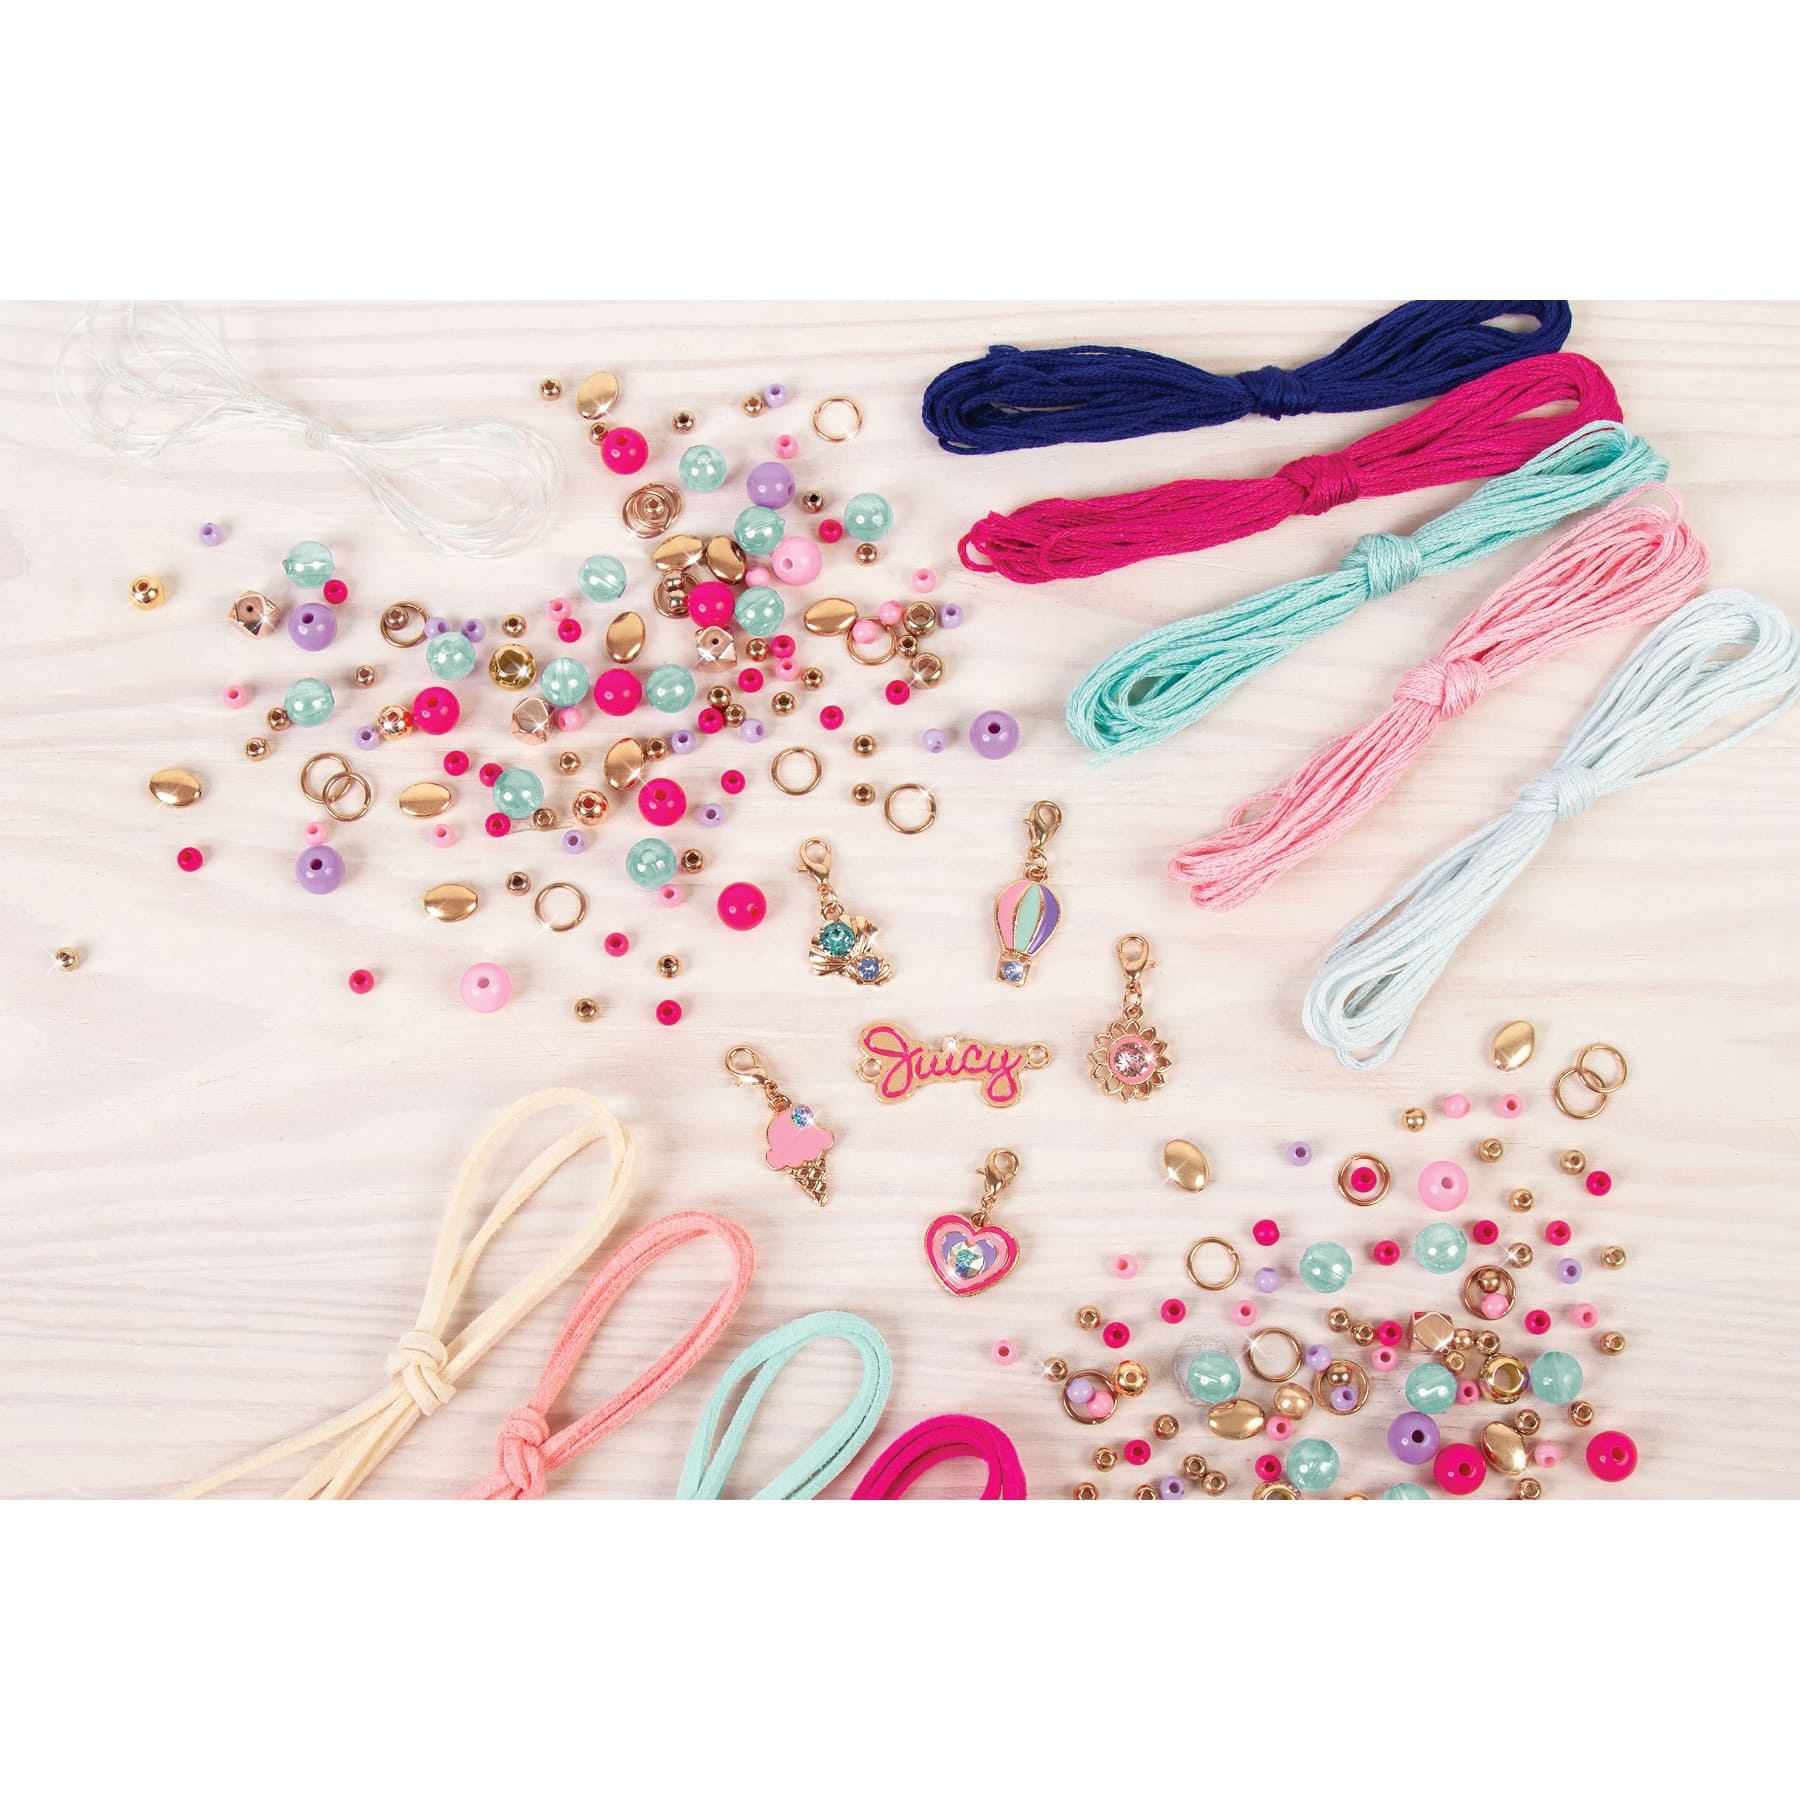 Juicy Couture Make it Real™ Absolutely Charming Bracelet Kit, Michaels